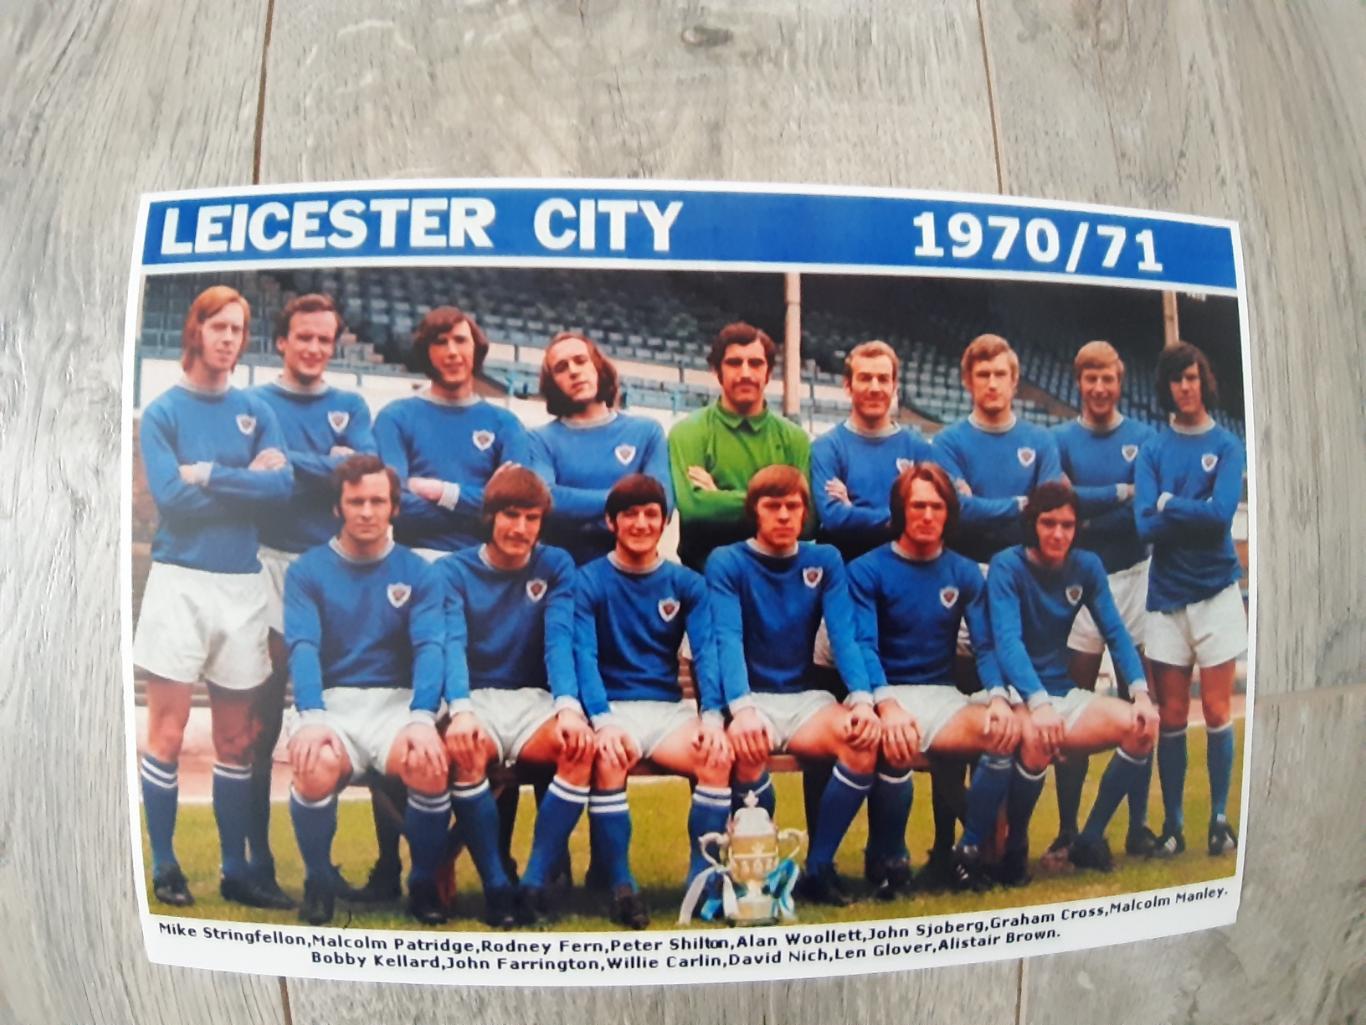 LEICESTER CITY 1970/71